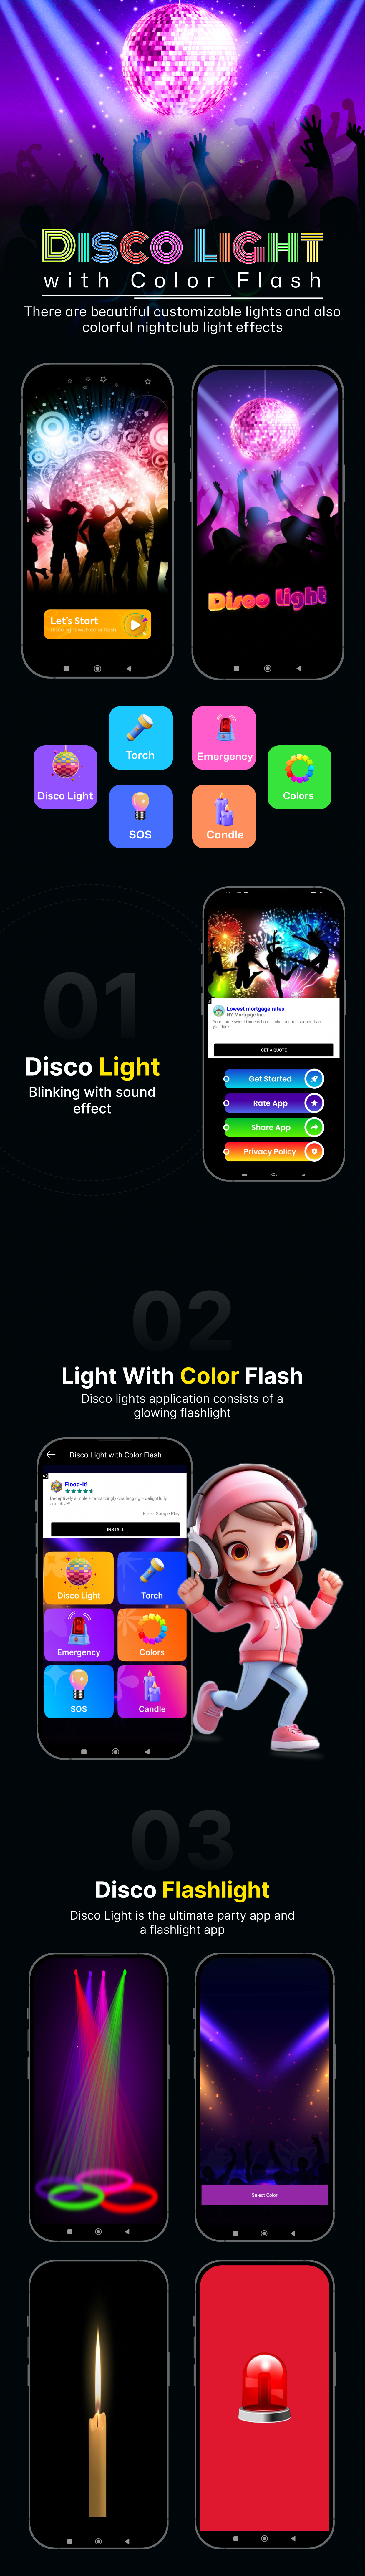 Disco Light with Color Flash - Disco Flash Light - Admob - Android App - 1